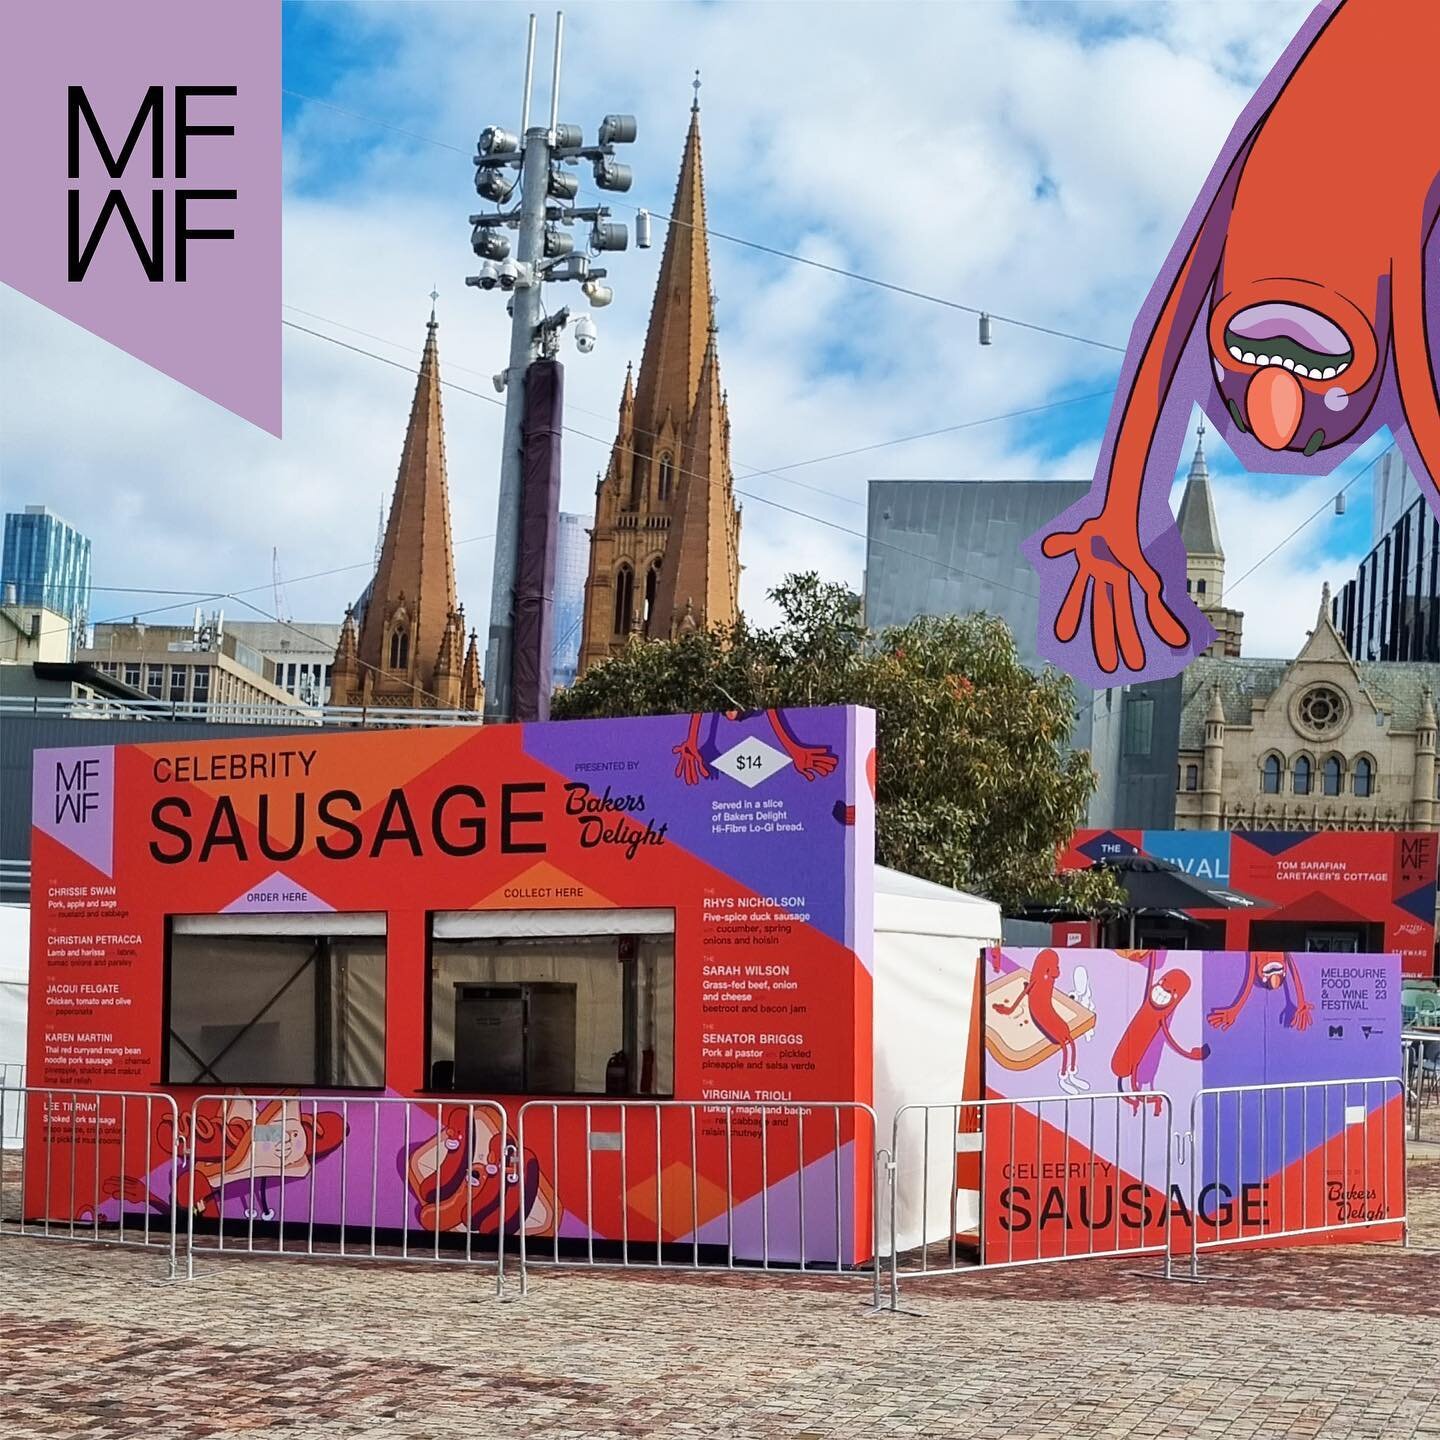 @melbfoodandwine festival has just wrapped and we had the joy of wrapping these delicious facades, we both manufactured and installed all signage featured. Everything we tried was definitely delicious! 

#MFWF #melbfoodandwine #FedSquare #FederationS